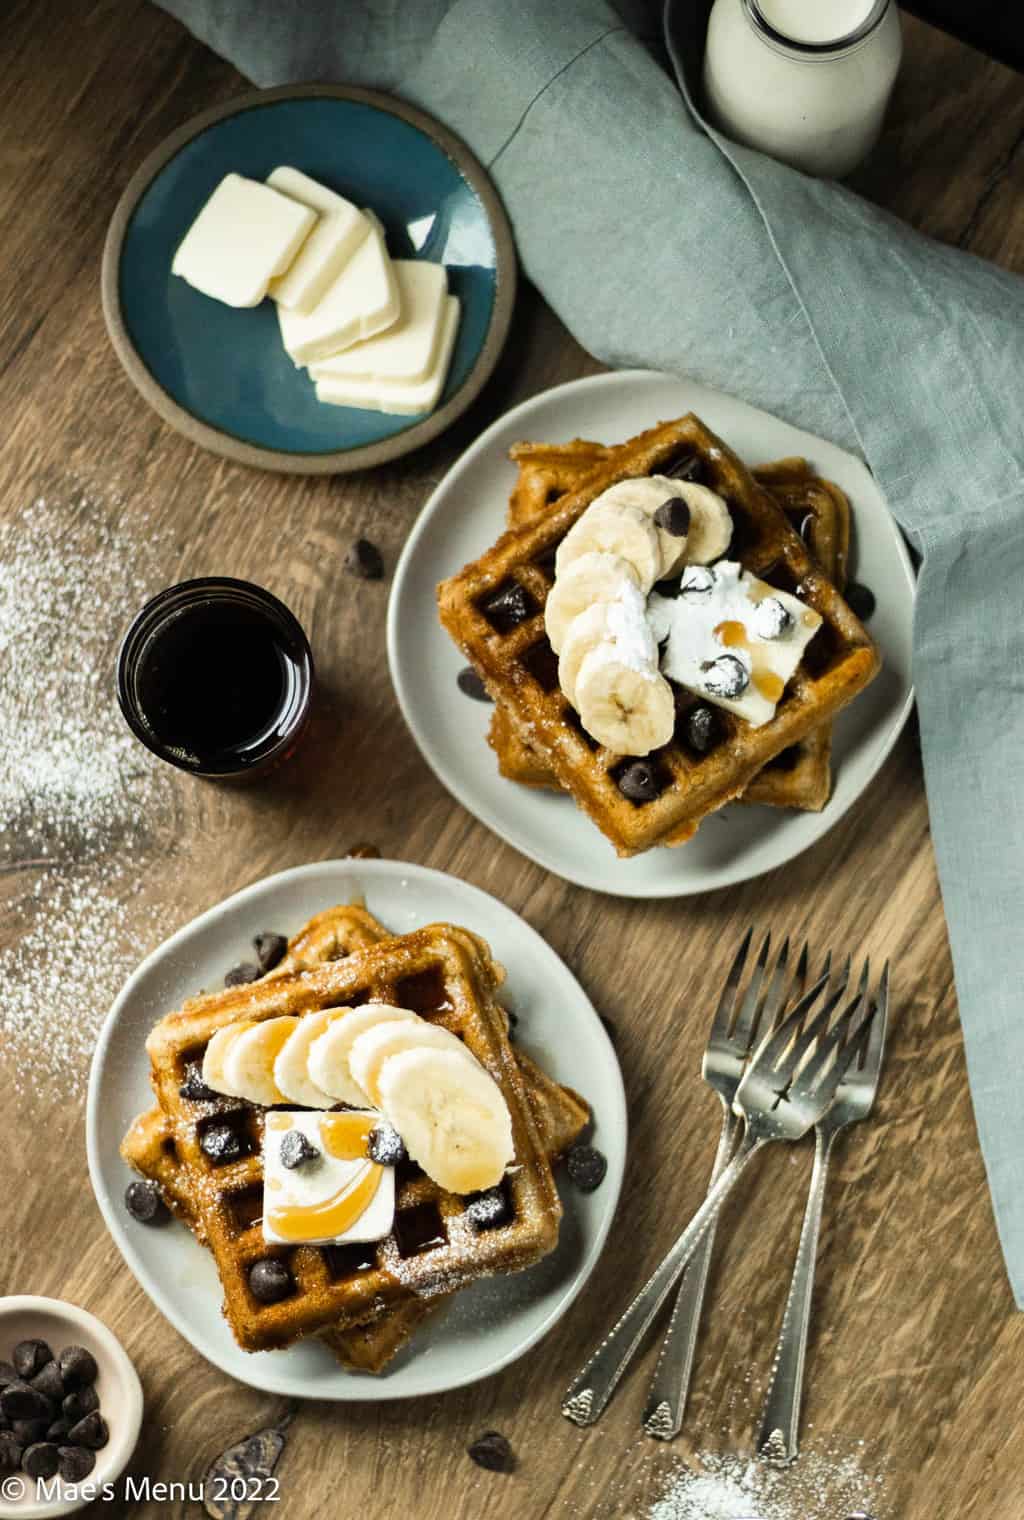 Plates of banana waffles with bananas, chocolate chips, syrup, and a small cup of syrup and milk.